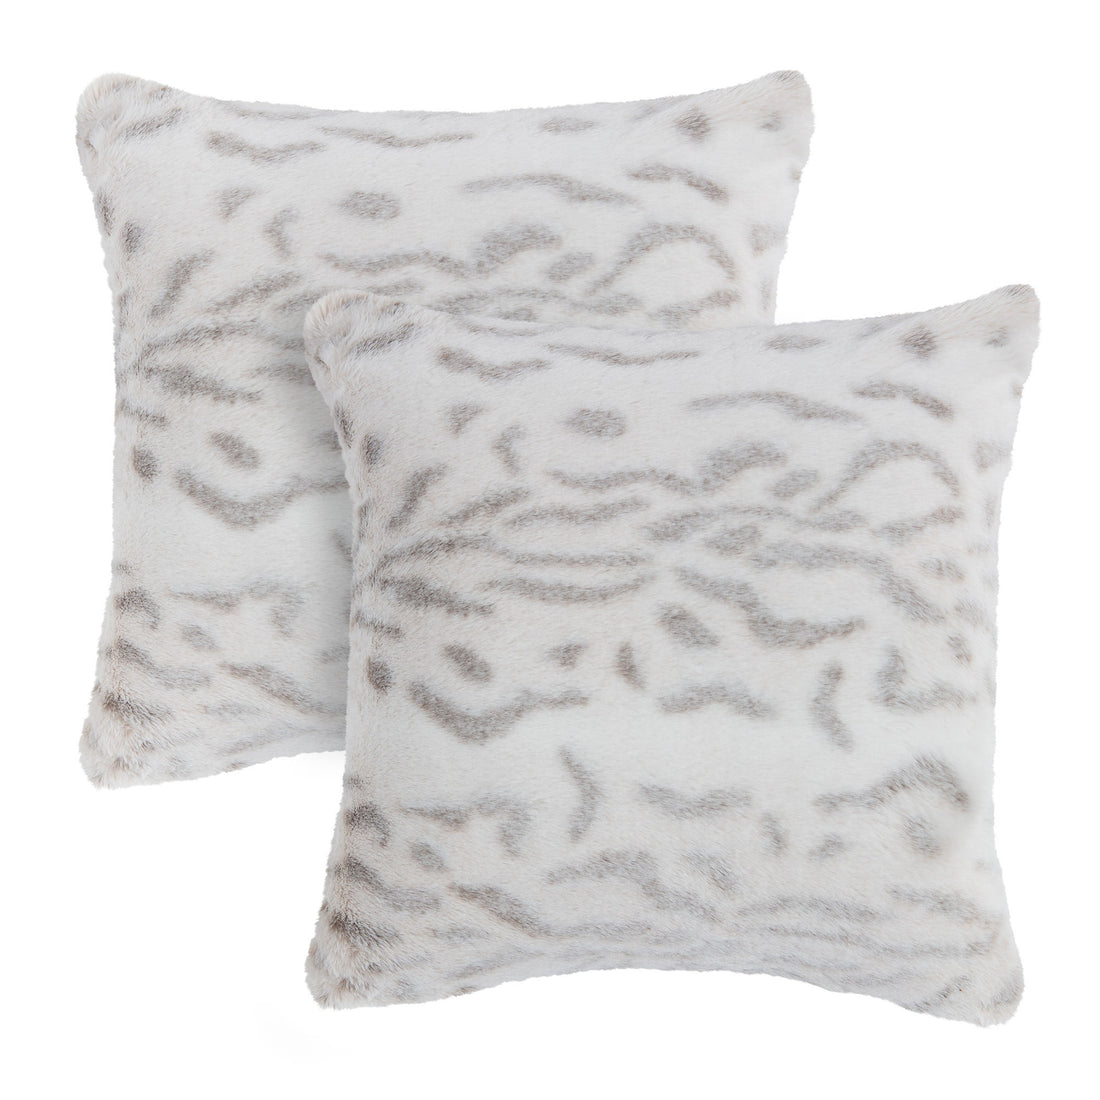 Snow Leopard Throw Pillow Covers